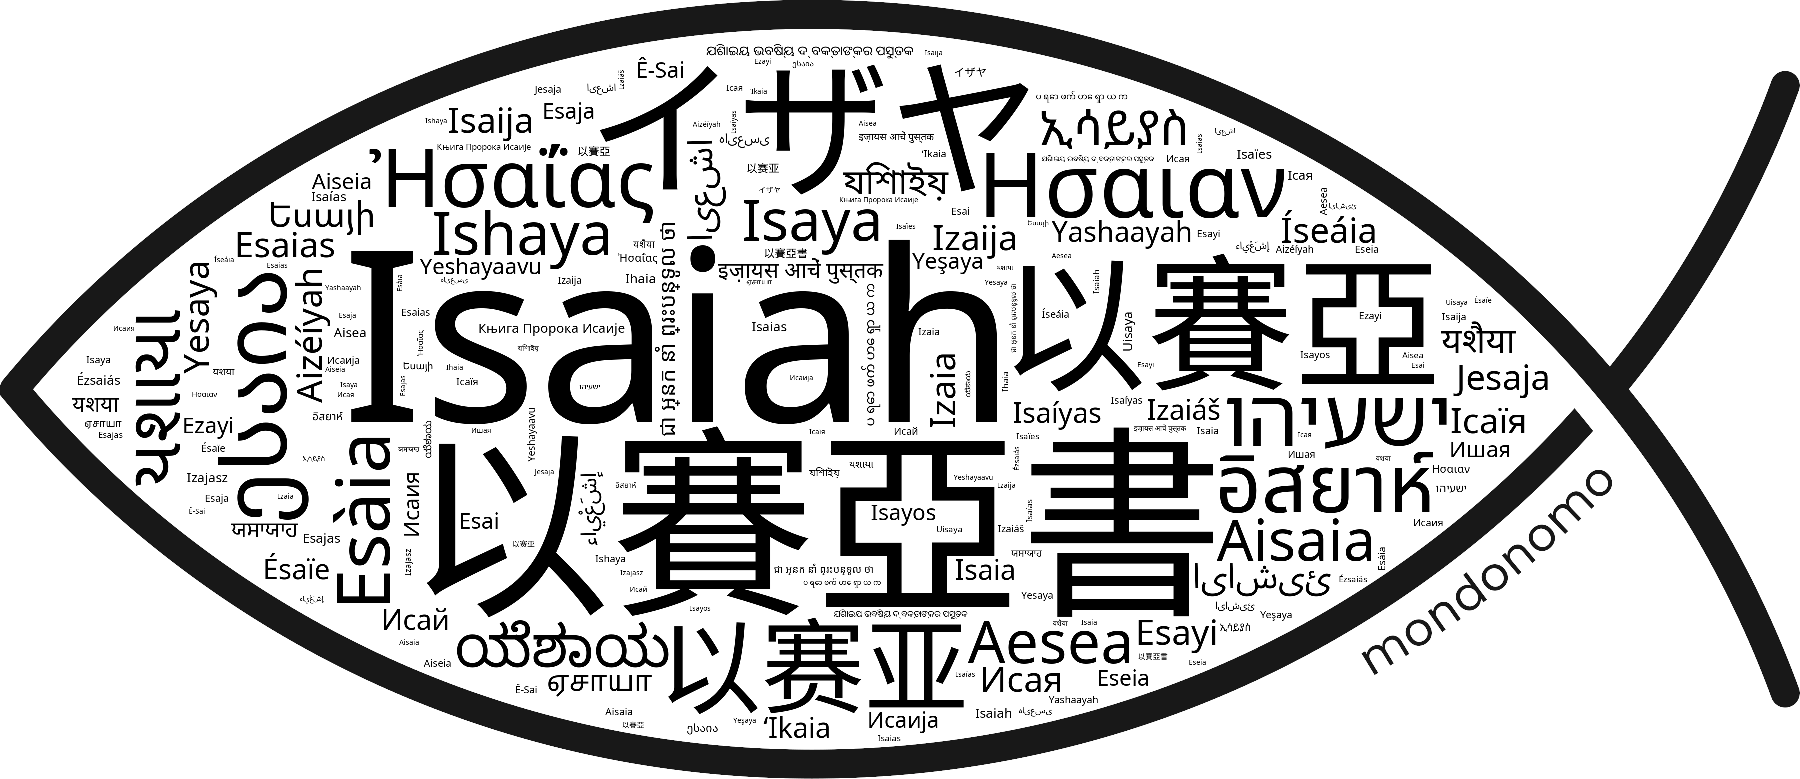 Name Isaiah in the world's Bibles